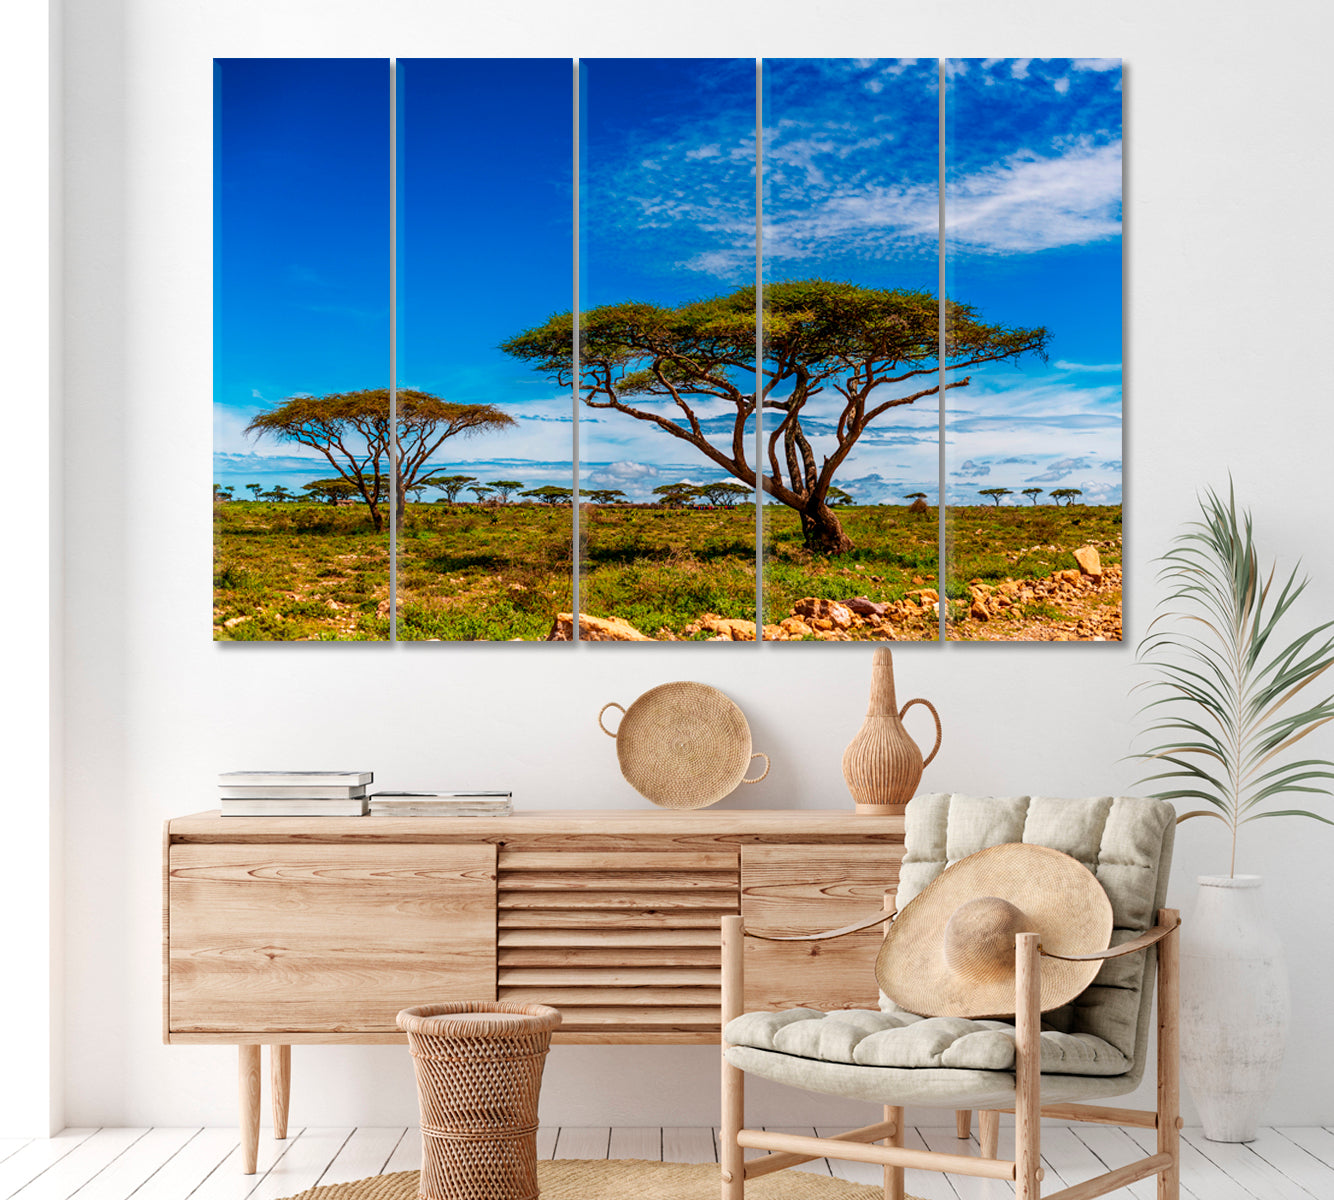 Ngorongoro Conservation Area. African Landscape Canvas Print ArtLexy 5 Panels 36"x24" inches 